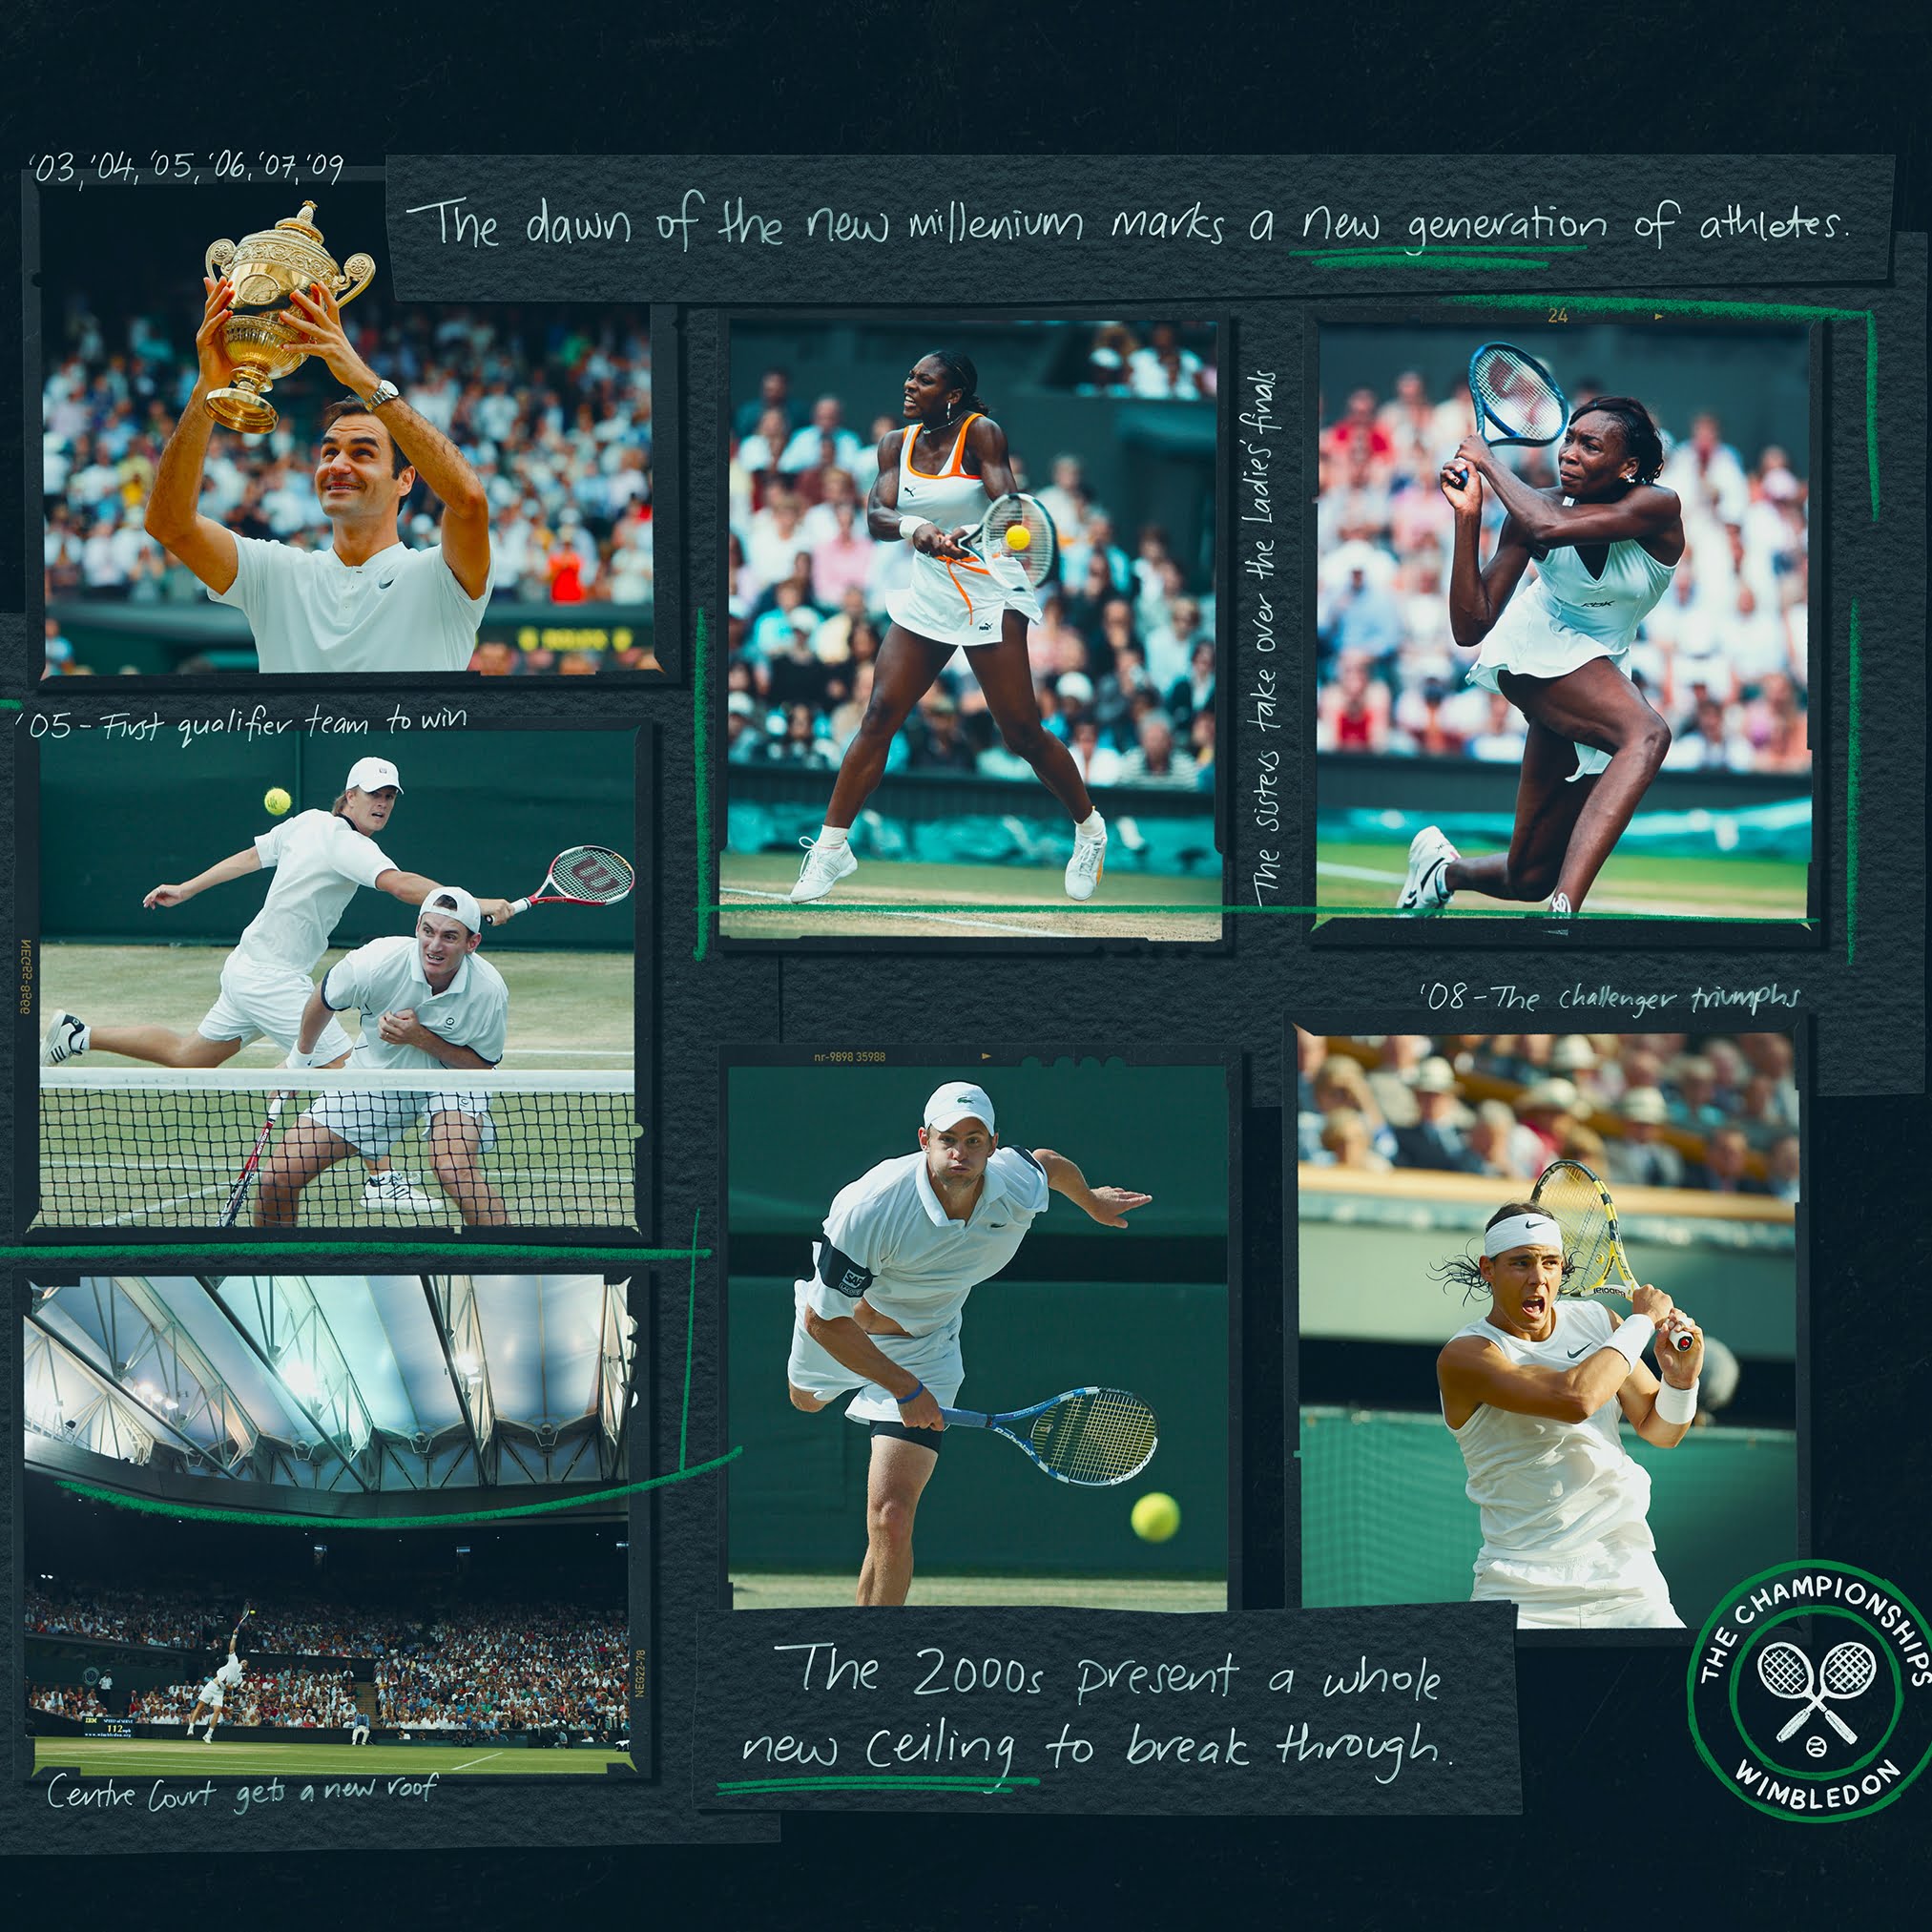 Wimbledon 2009 imagery of tennis via Purple PR for use by 360 MAGAZINE